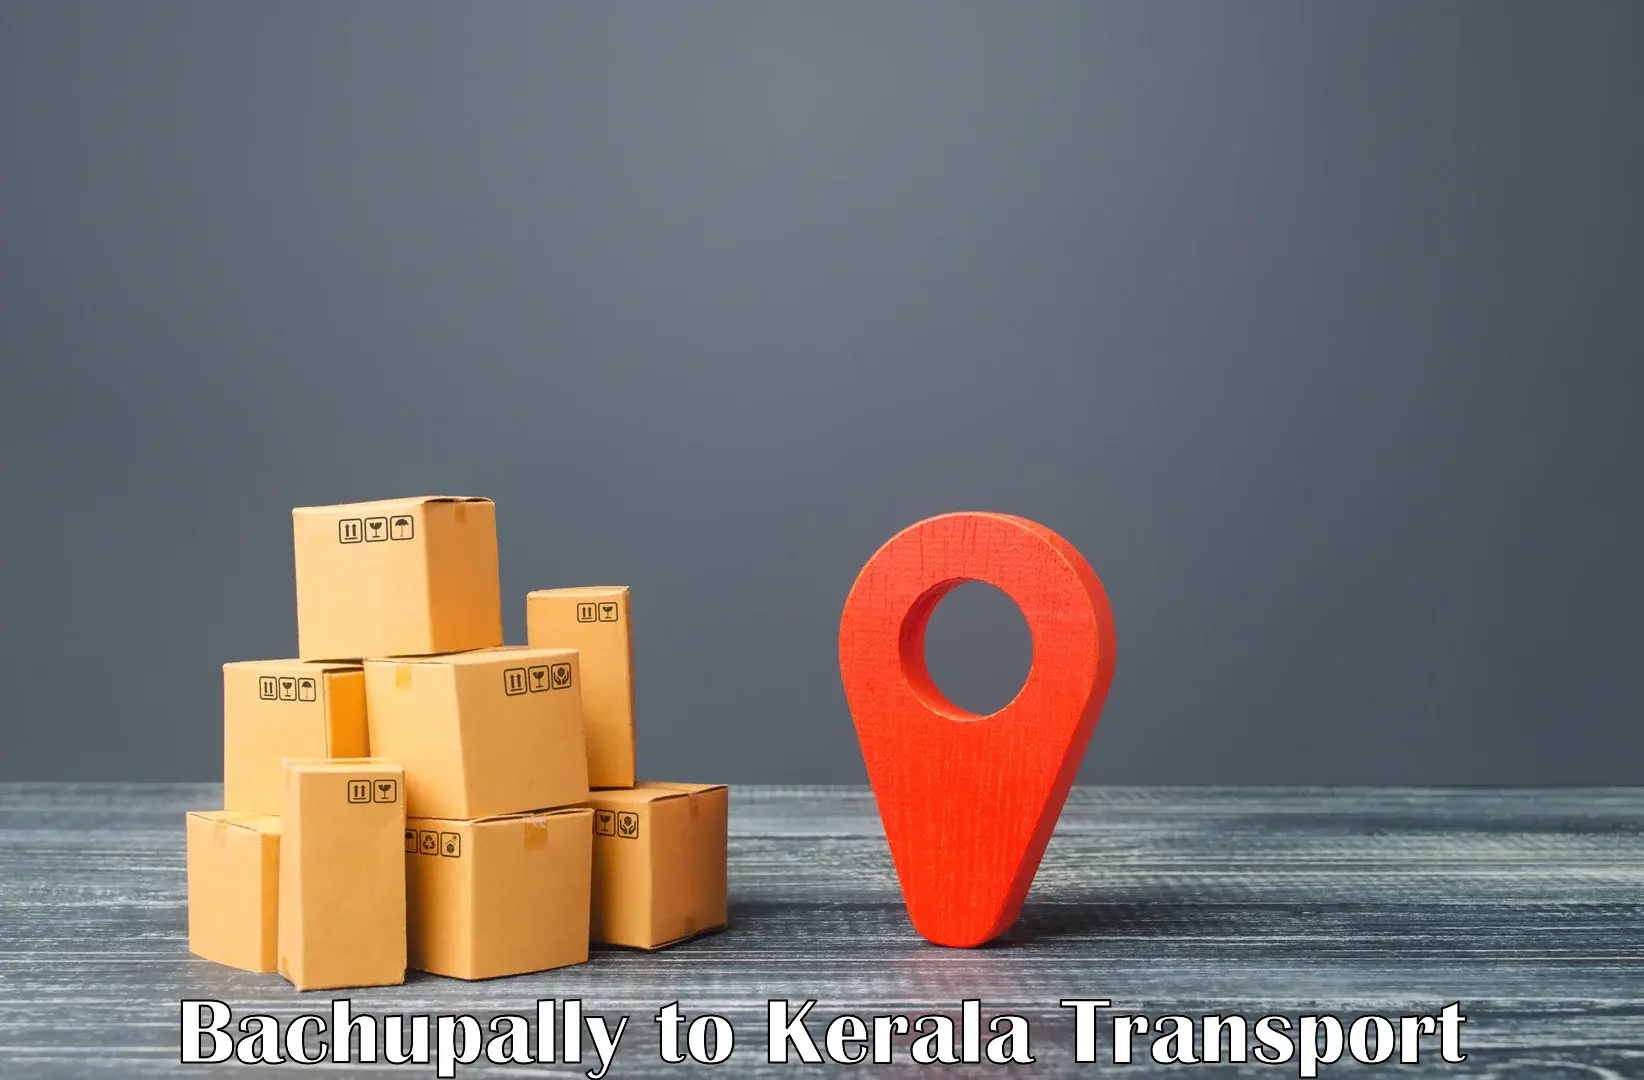 Two wheeler parcel service Bachupally to Cochin University of Science and Technology